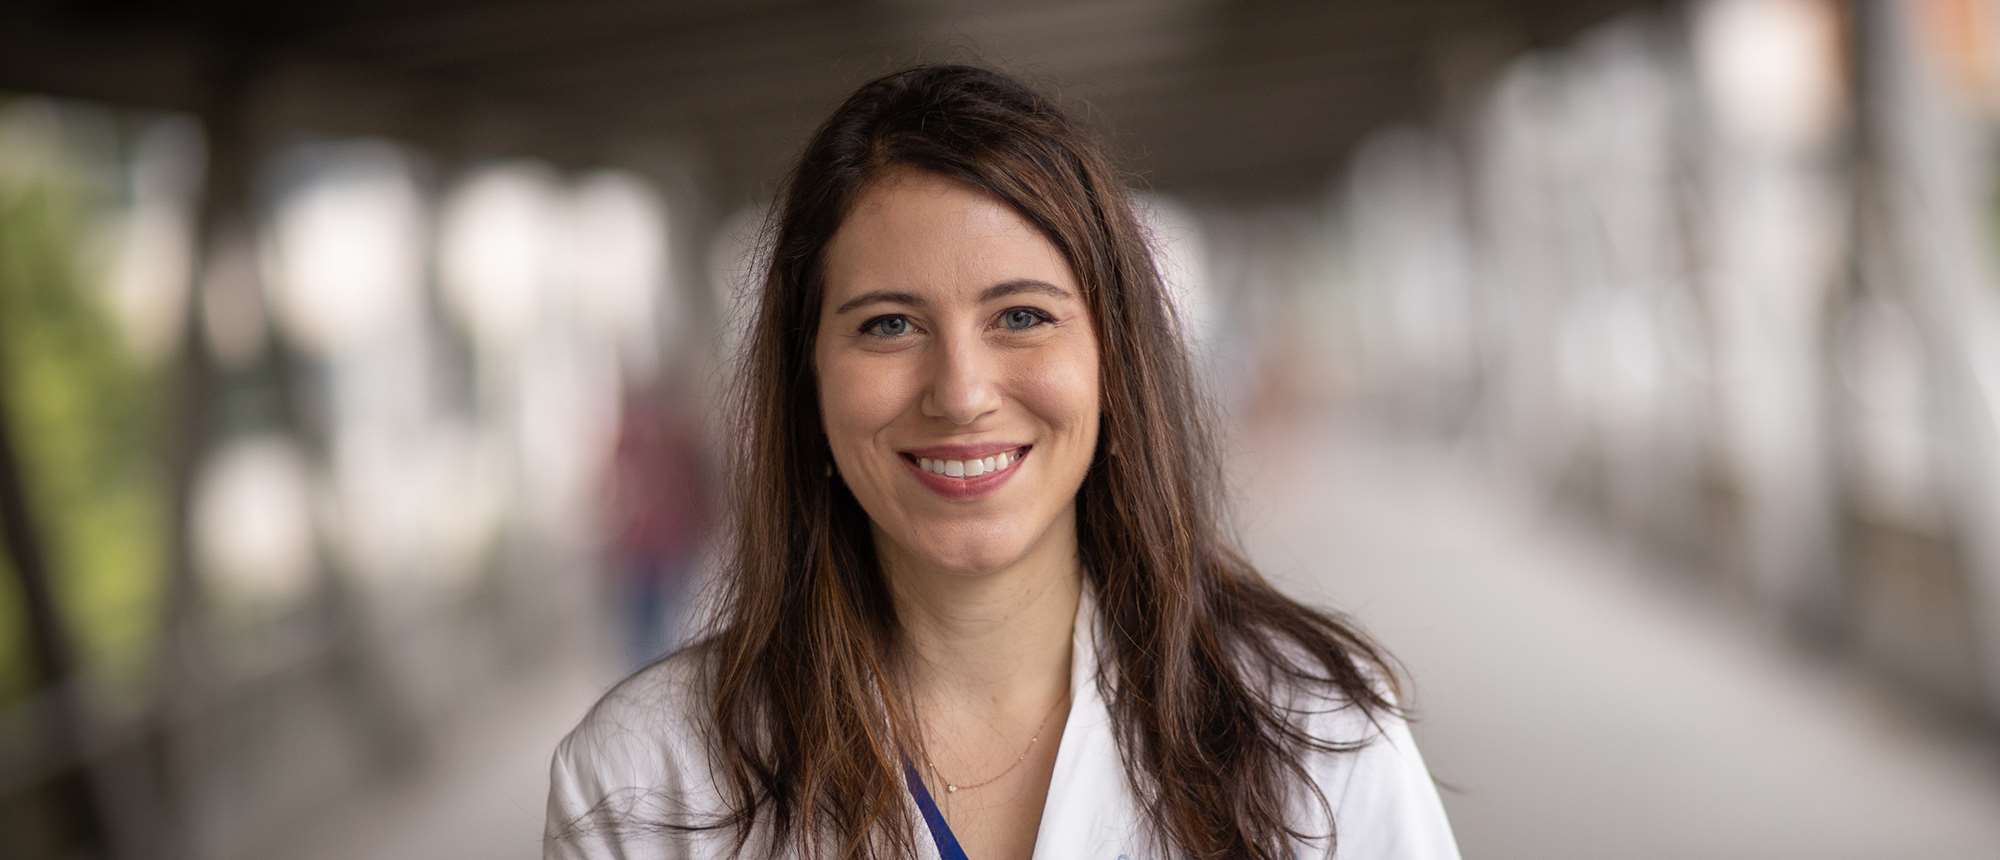 Alumna sees practice of medicine as much more than patient care